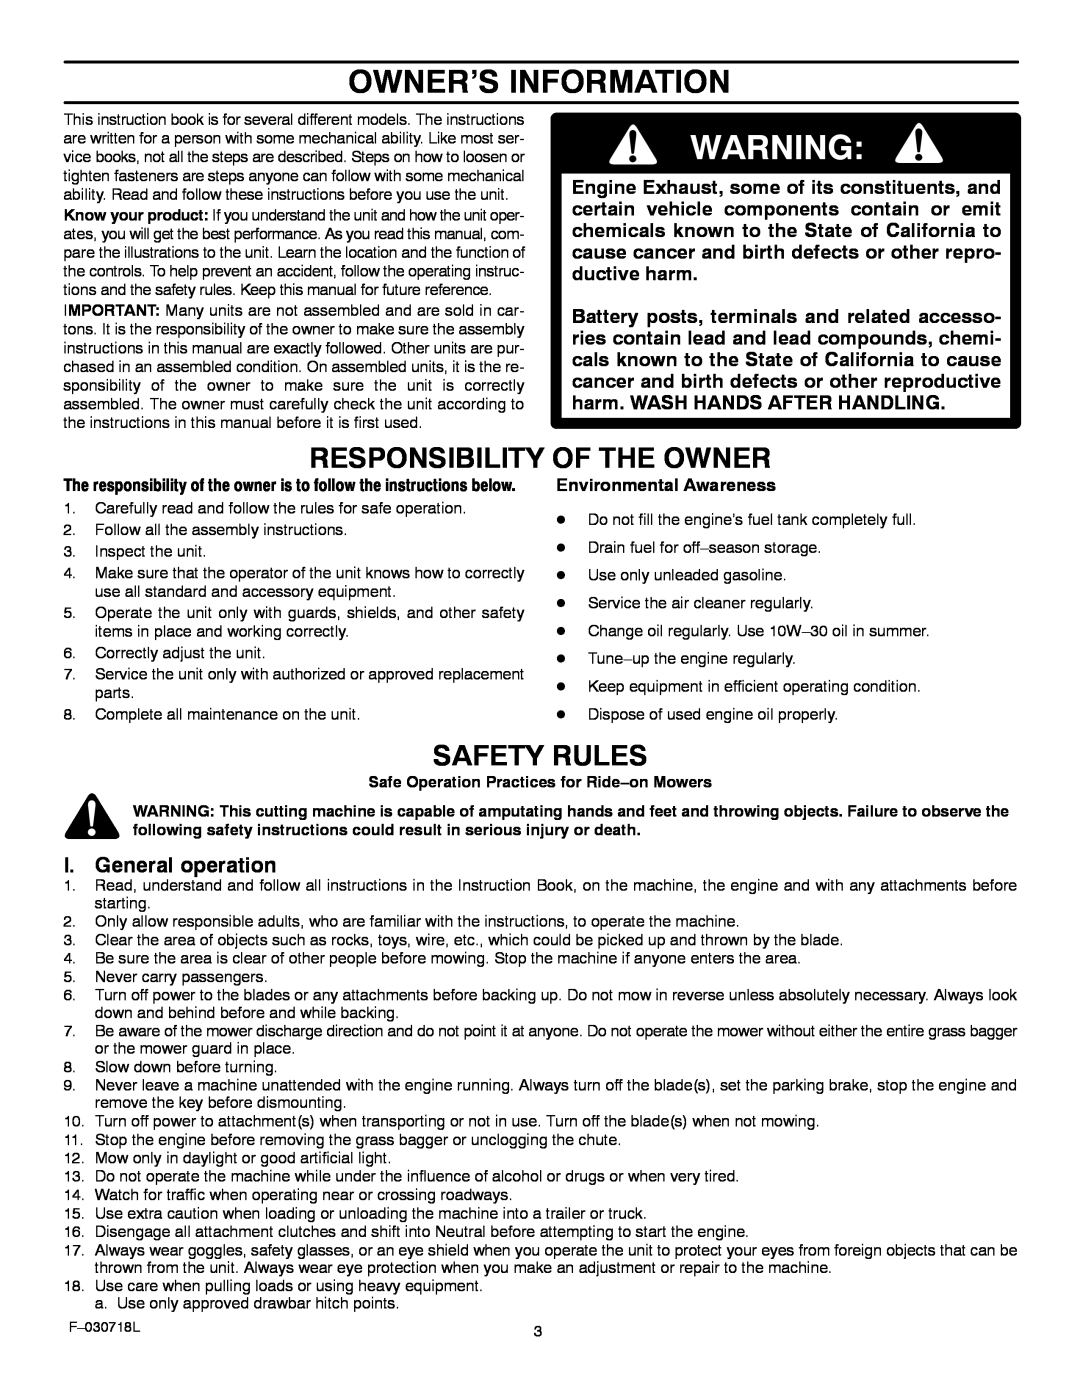 Murray 461000x8A manual Owner’S Information, Responsibility Of The Owner, Safety Rules, I. General operation 